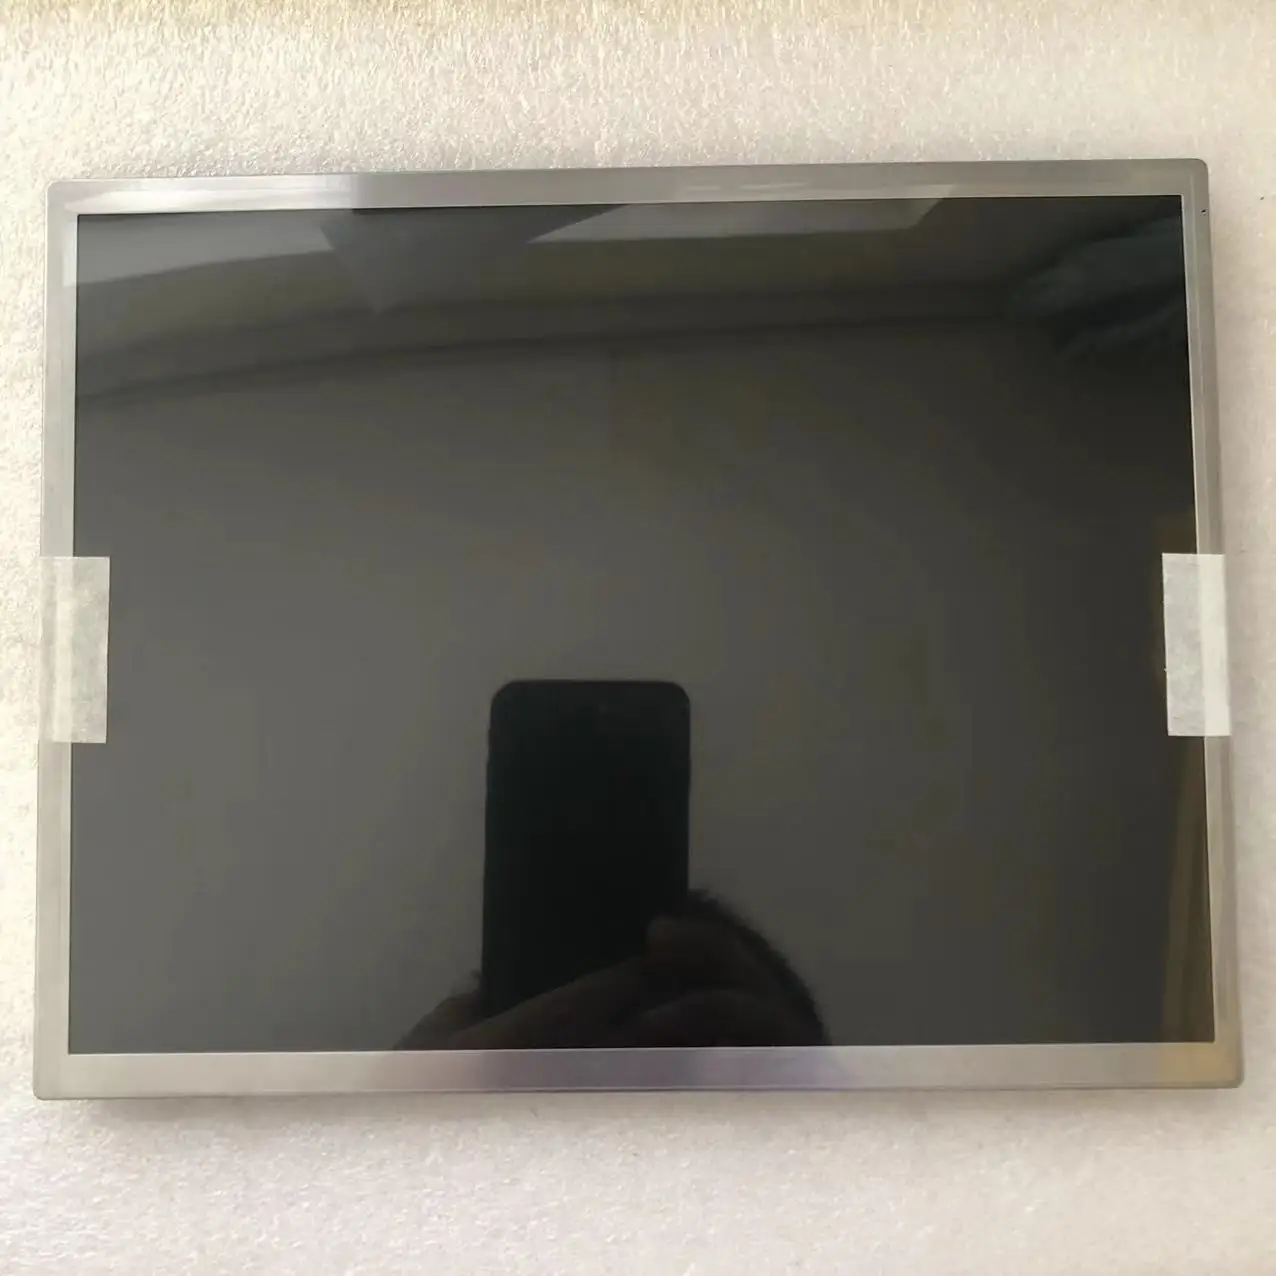 For 8.4-inch NL6448AC33-A1D LCD Screen Display Panel Fully Tested Before Shipment 5 5 inch for nl3224bc35 20 lcd screen display panel fully tested before shipment